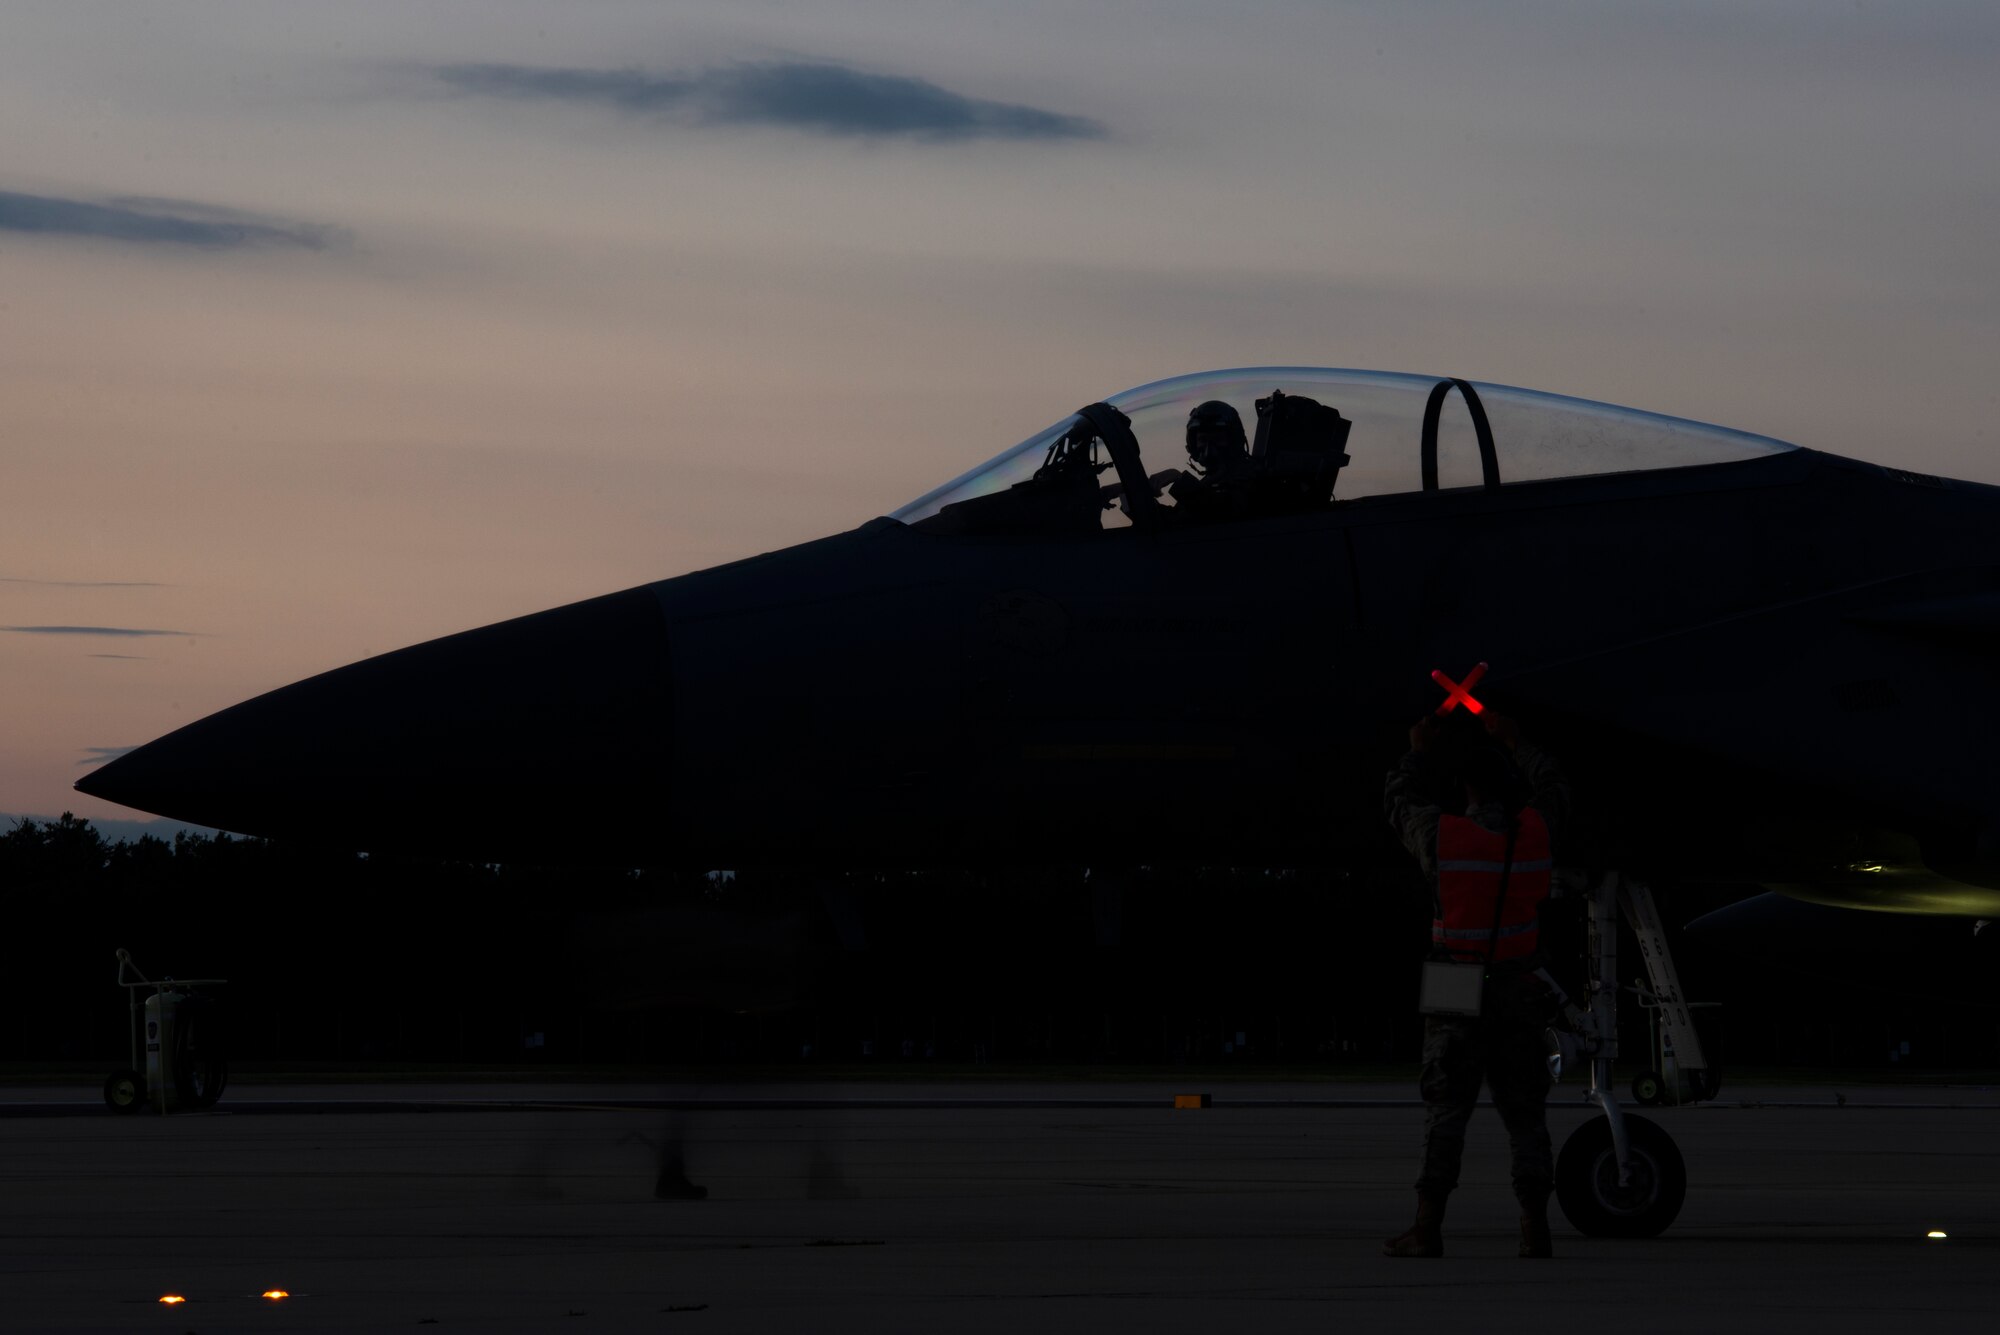 A U.S. Air Force F-15C Eagle, assigned to the 493rd Fighter Squadron, awaits completion of pre-flight checks at Royal Air Force Lakenheath, England, Sept. 8, 2020. Night Flying Exercises provide 48th Fighter Wing aircrew and support personnel the experience needed to maintain a ready force capable of ensuring the collective defence of the NATO alliance. (U.S. Air Force photo by Airman 1st Class Jessi Monte)